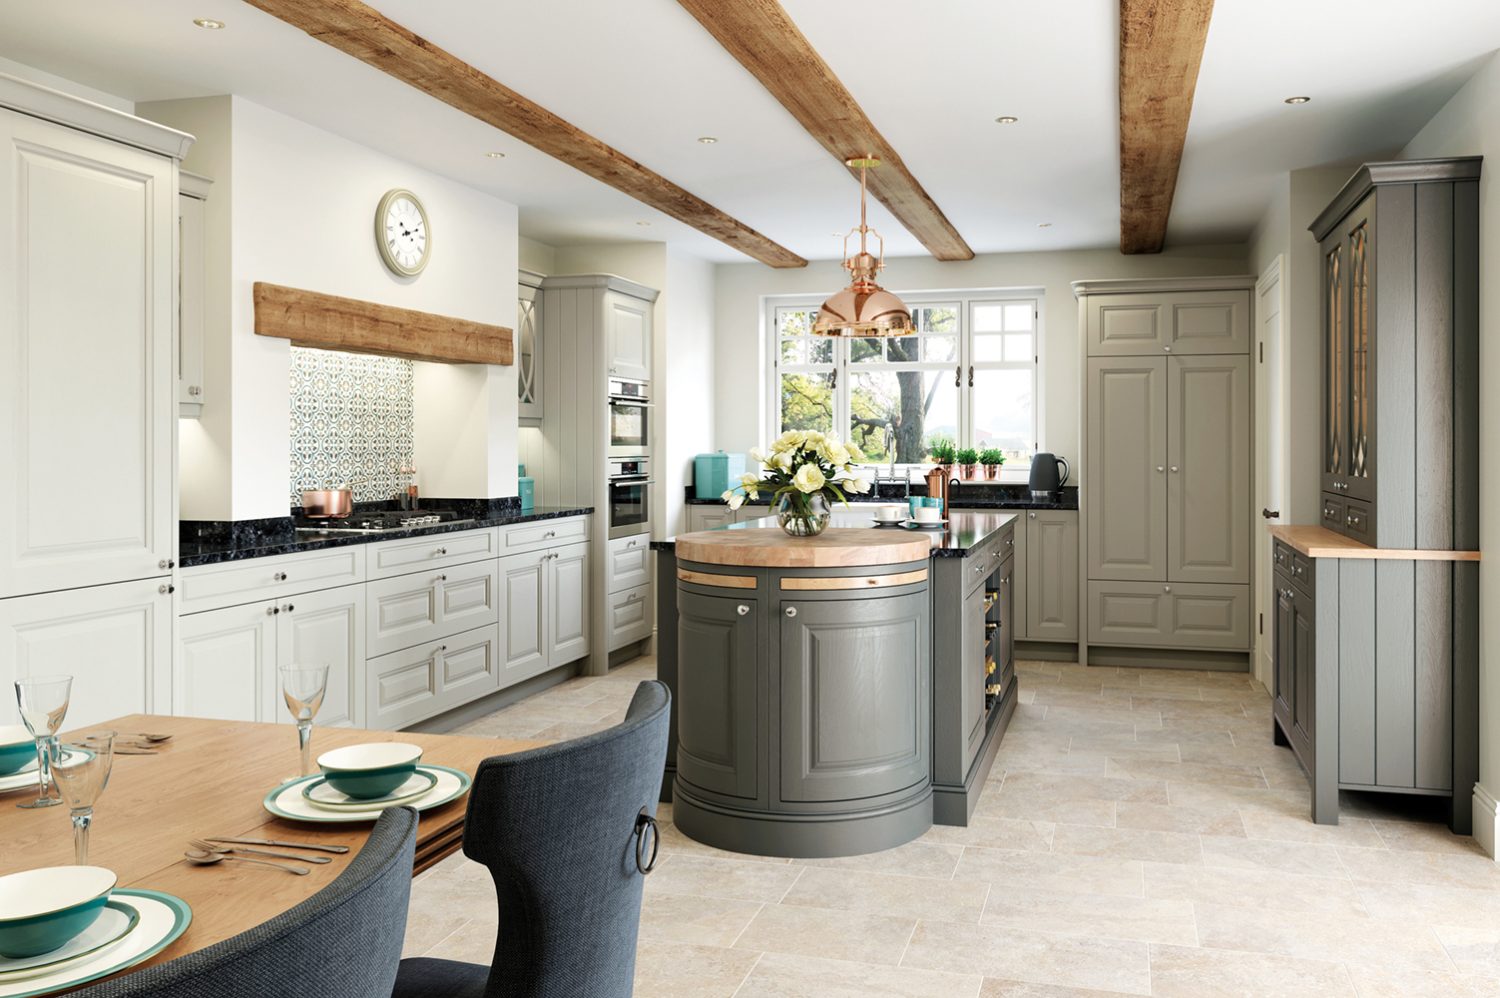 Jackson shaker kitchen door, showcased in a beautiful kitchen design using Gunmetal Grey and Stone colour options to create a dual tone kitchen design. Designed by The Kitchen Depot.